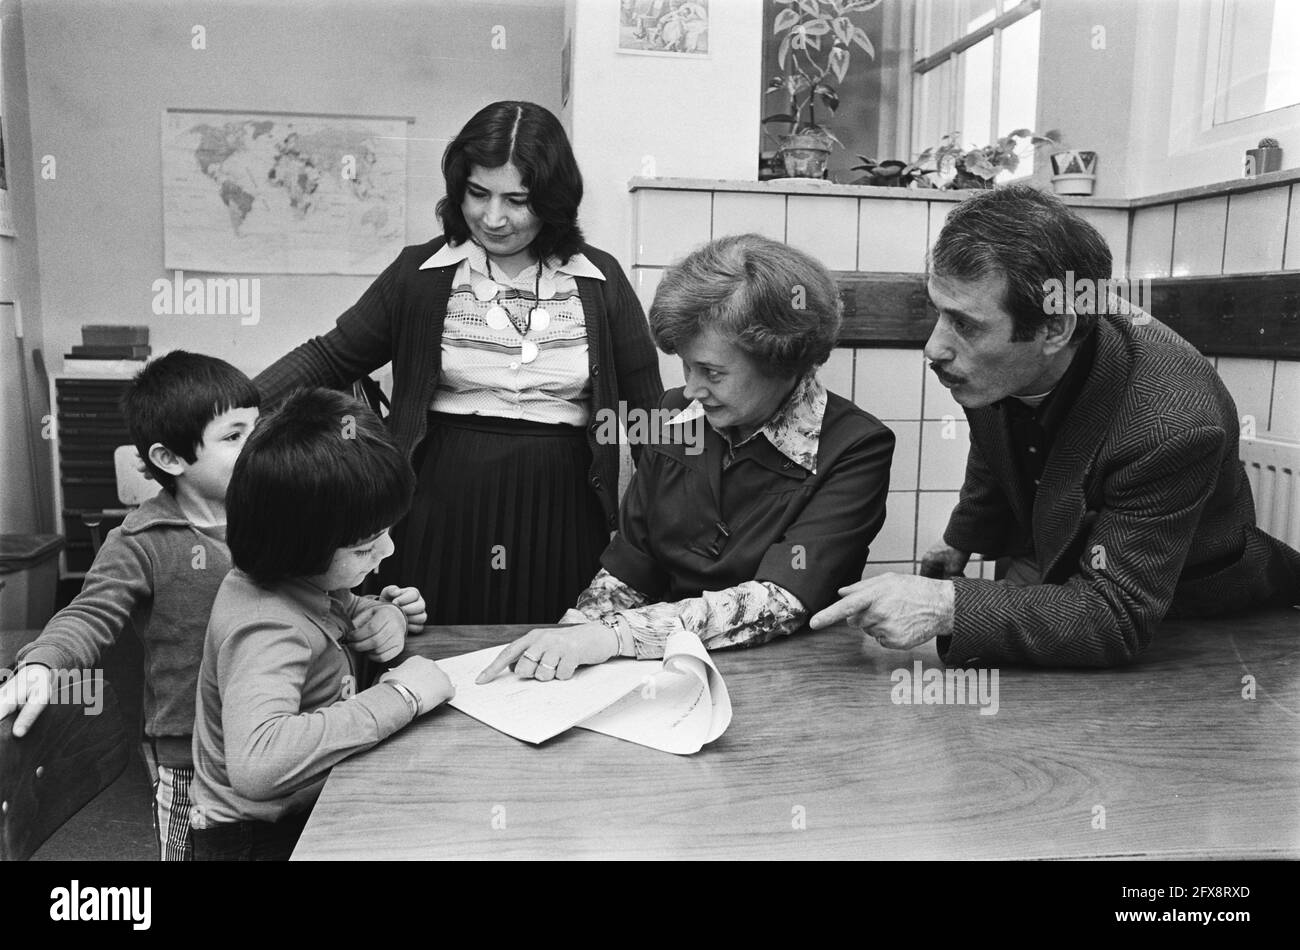 Visit of foreign couple to Maria School, assignment Ministry of Education and Science, March 18, 1978, The Netherlands, 20th century press agency photo, news to remember, documentary, historic photography 1945-1990, visual stories, human history of the Twentieth Century, capturing moments in time Stock Photo